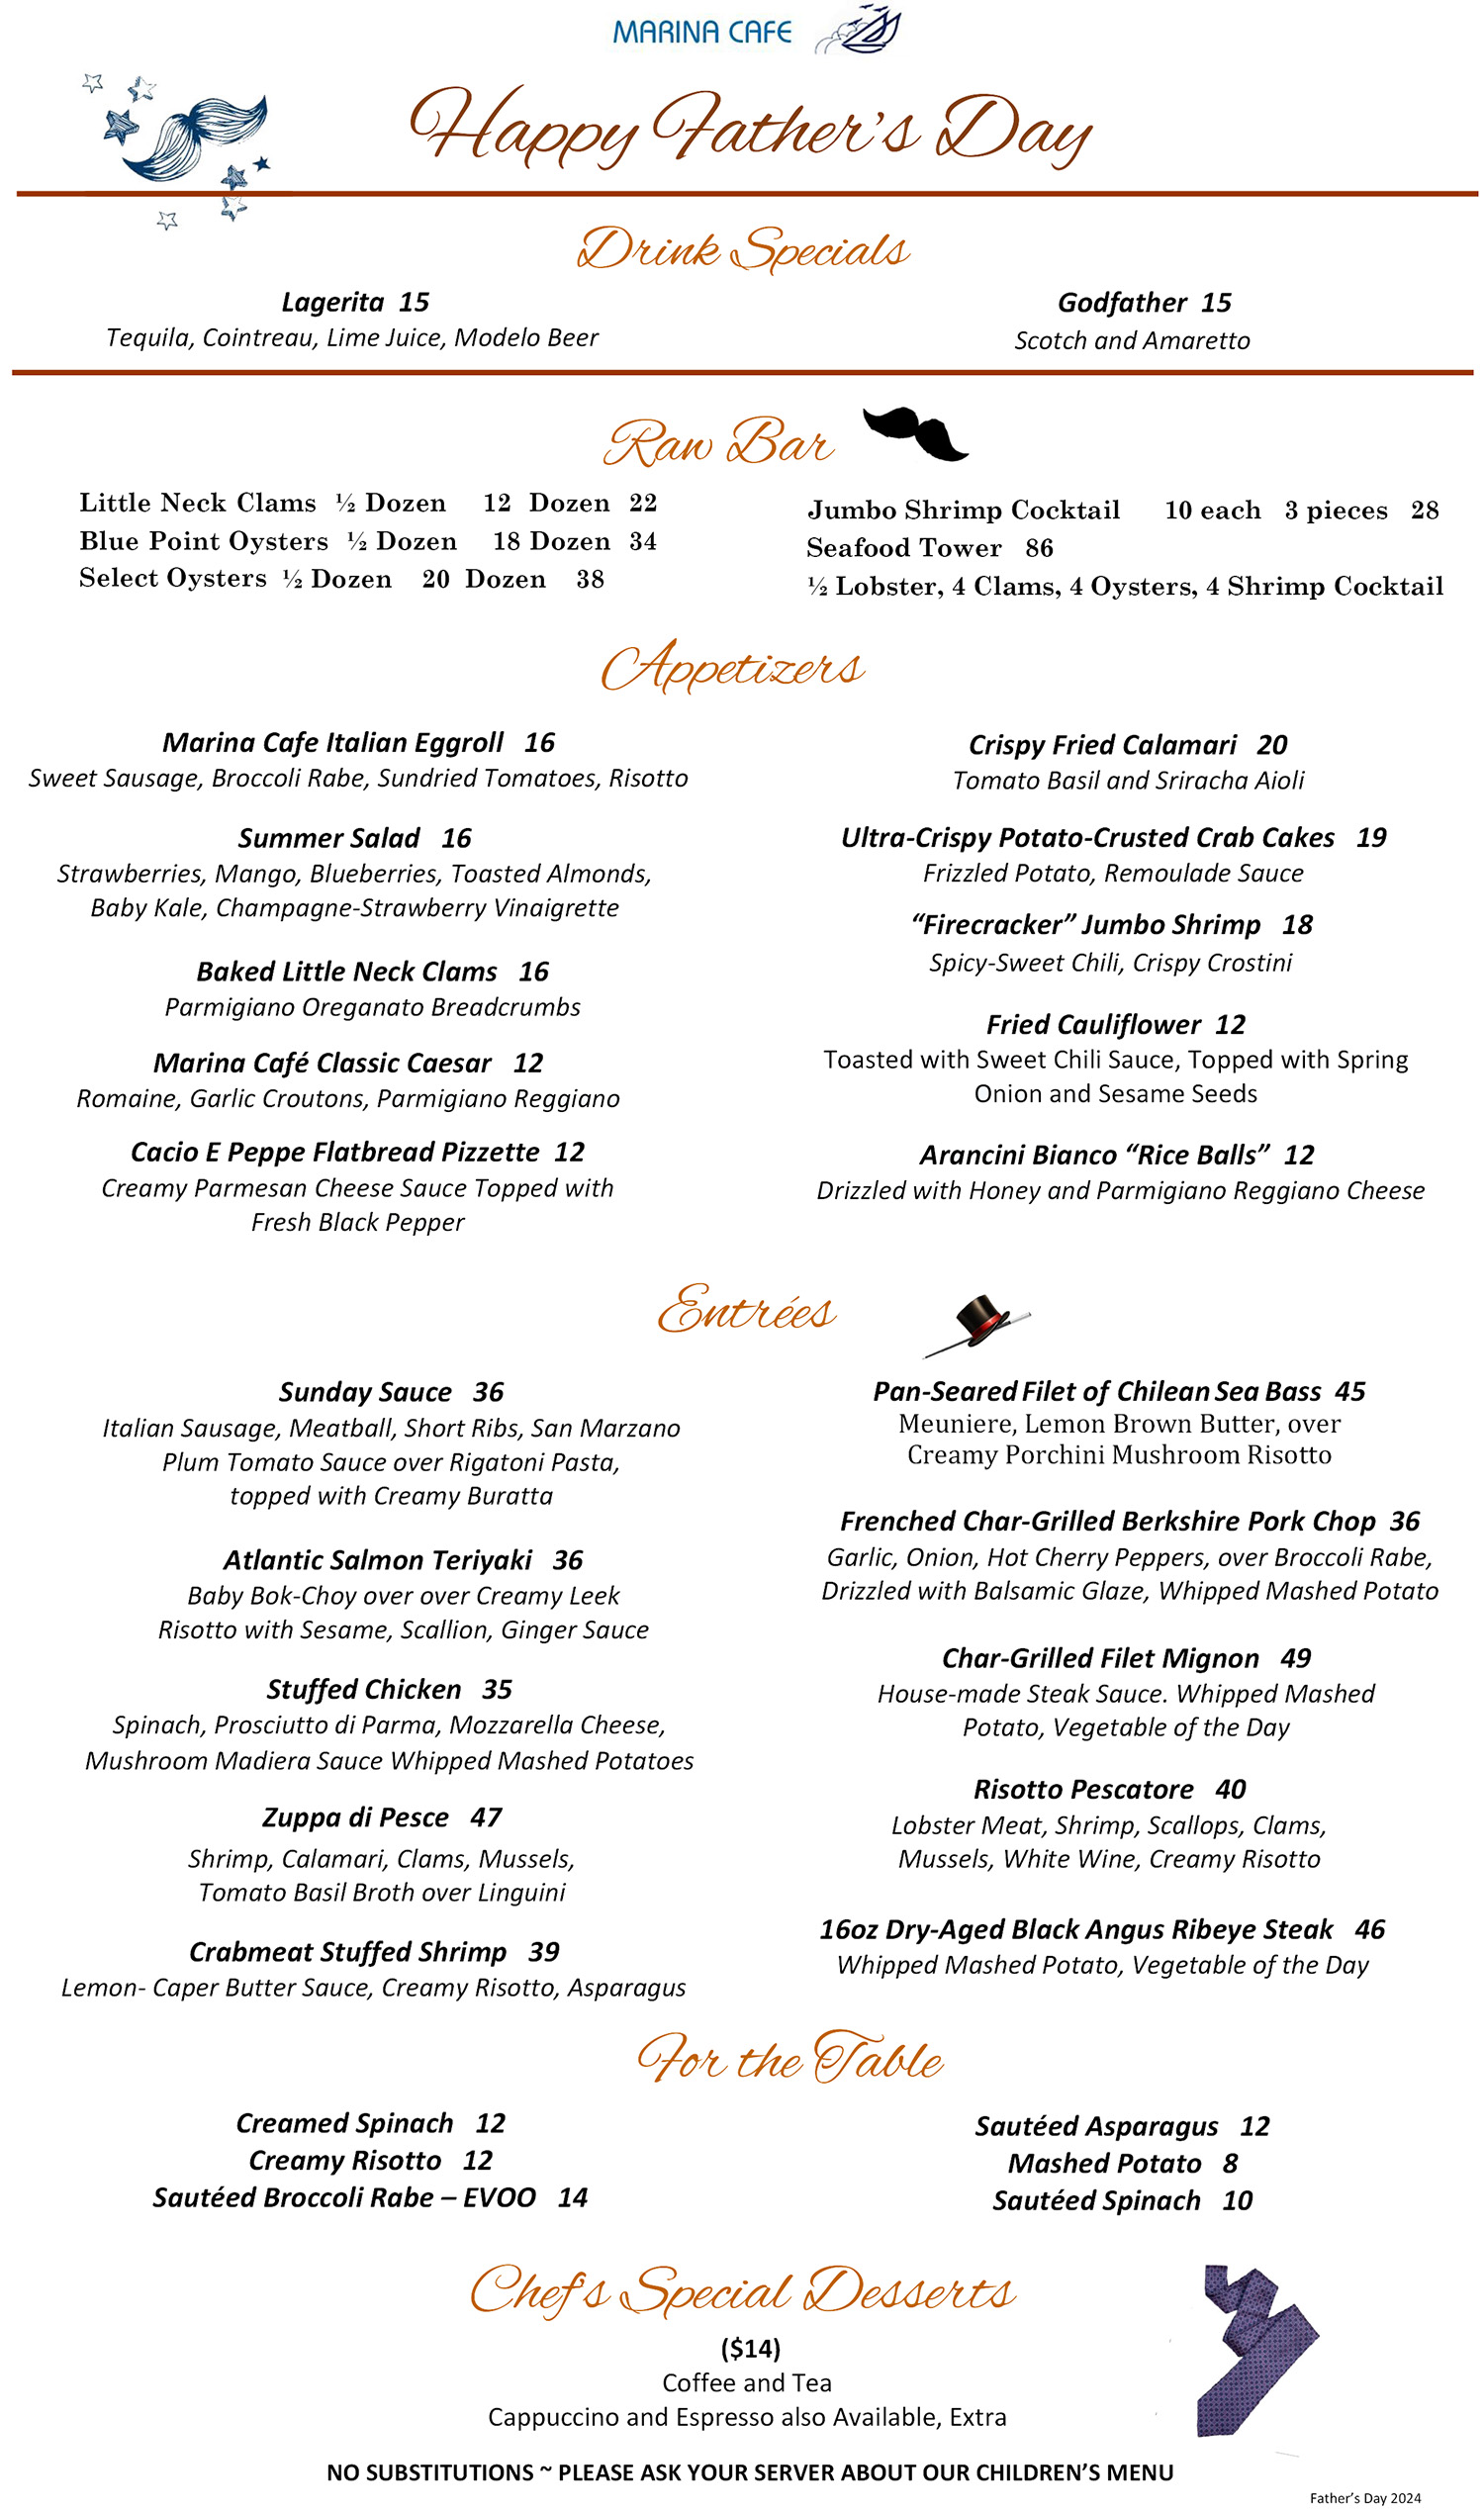 Father's Day Lunch and Dinner menu at Marina Cafe on Staten Island